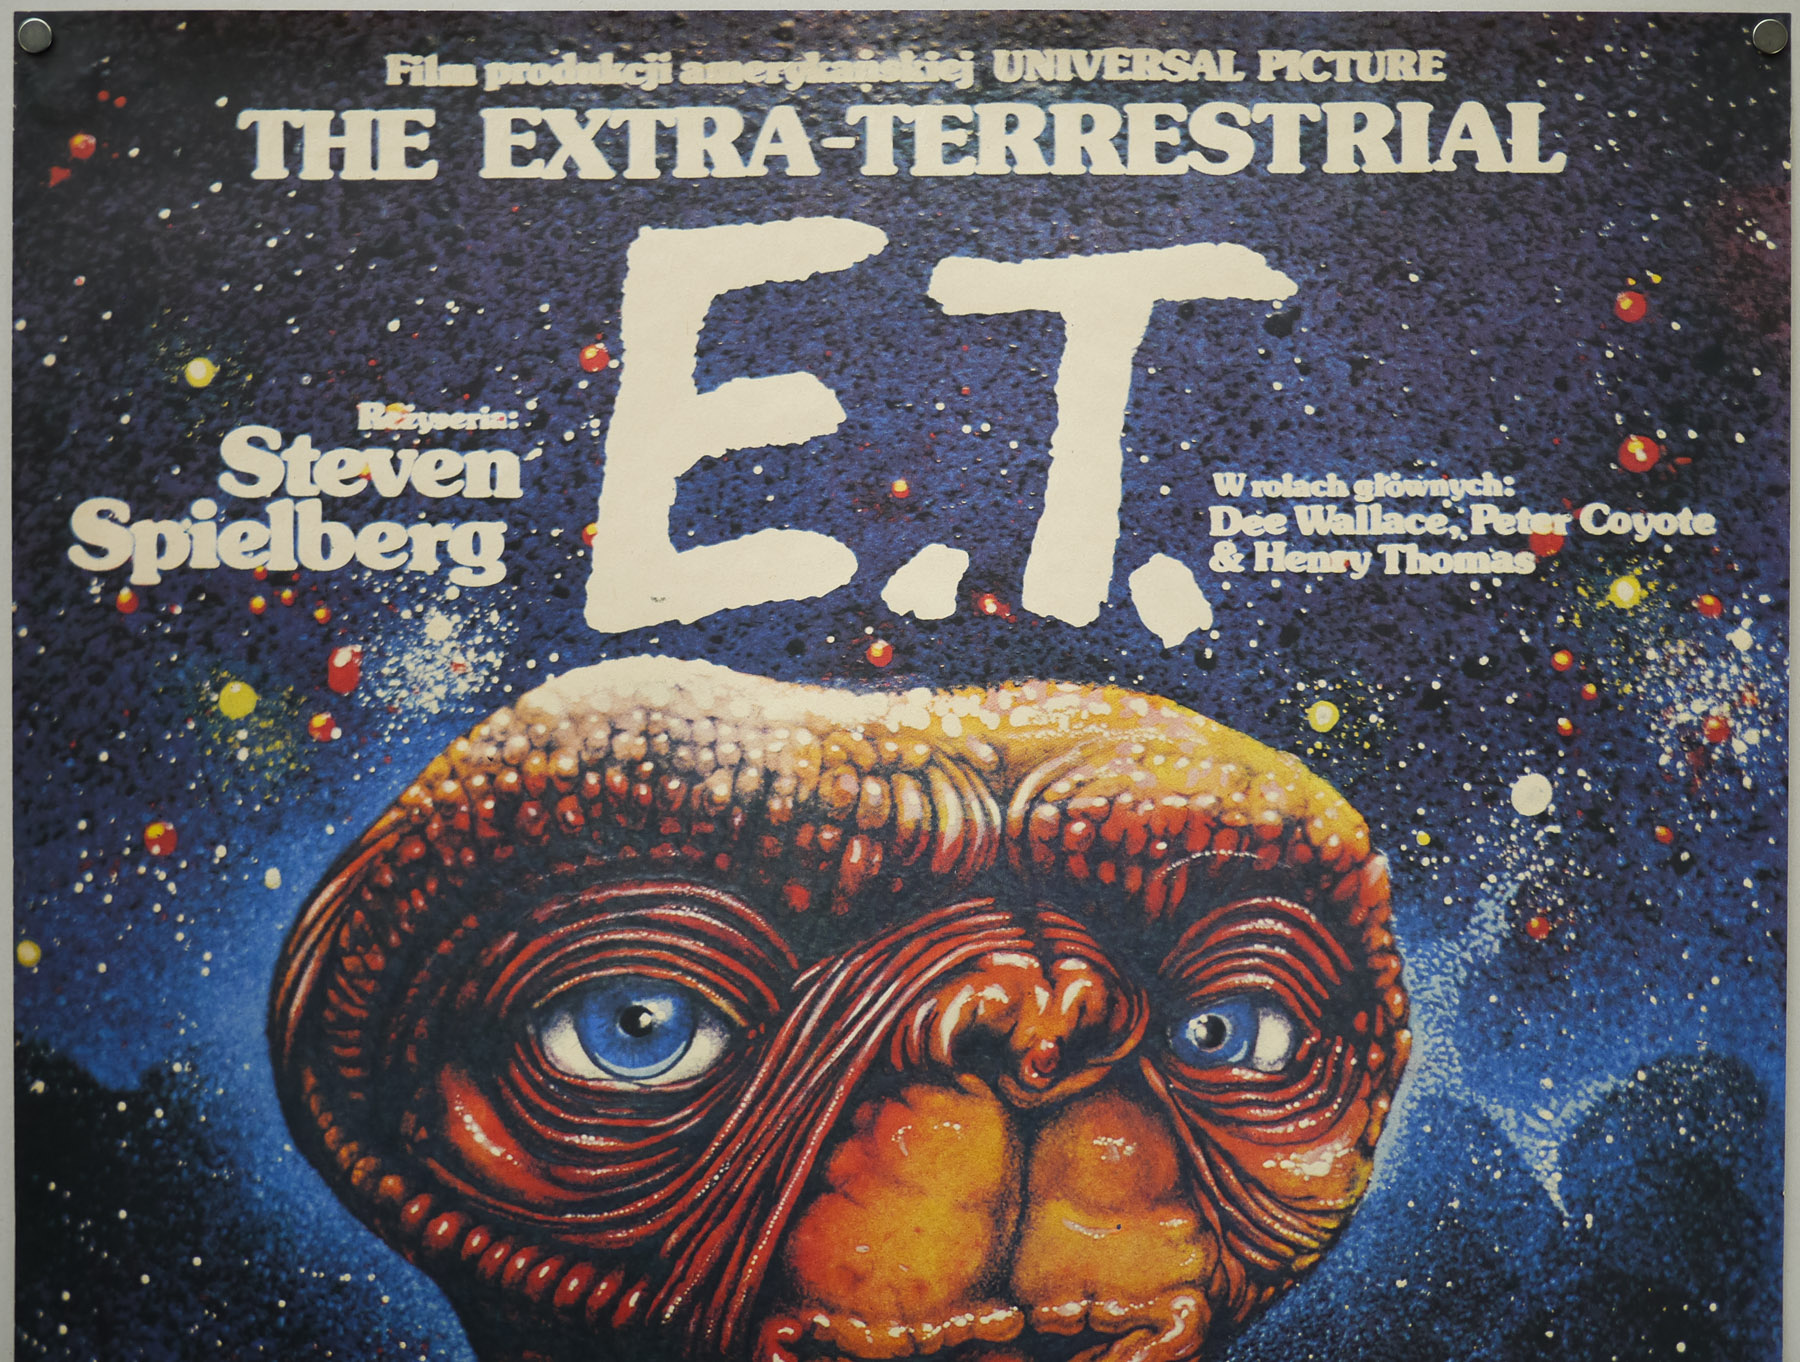 E.T. the Extra-Terrestrial, Polish Movie Poster